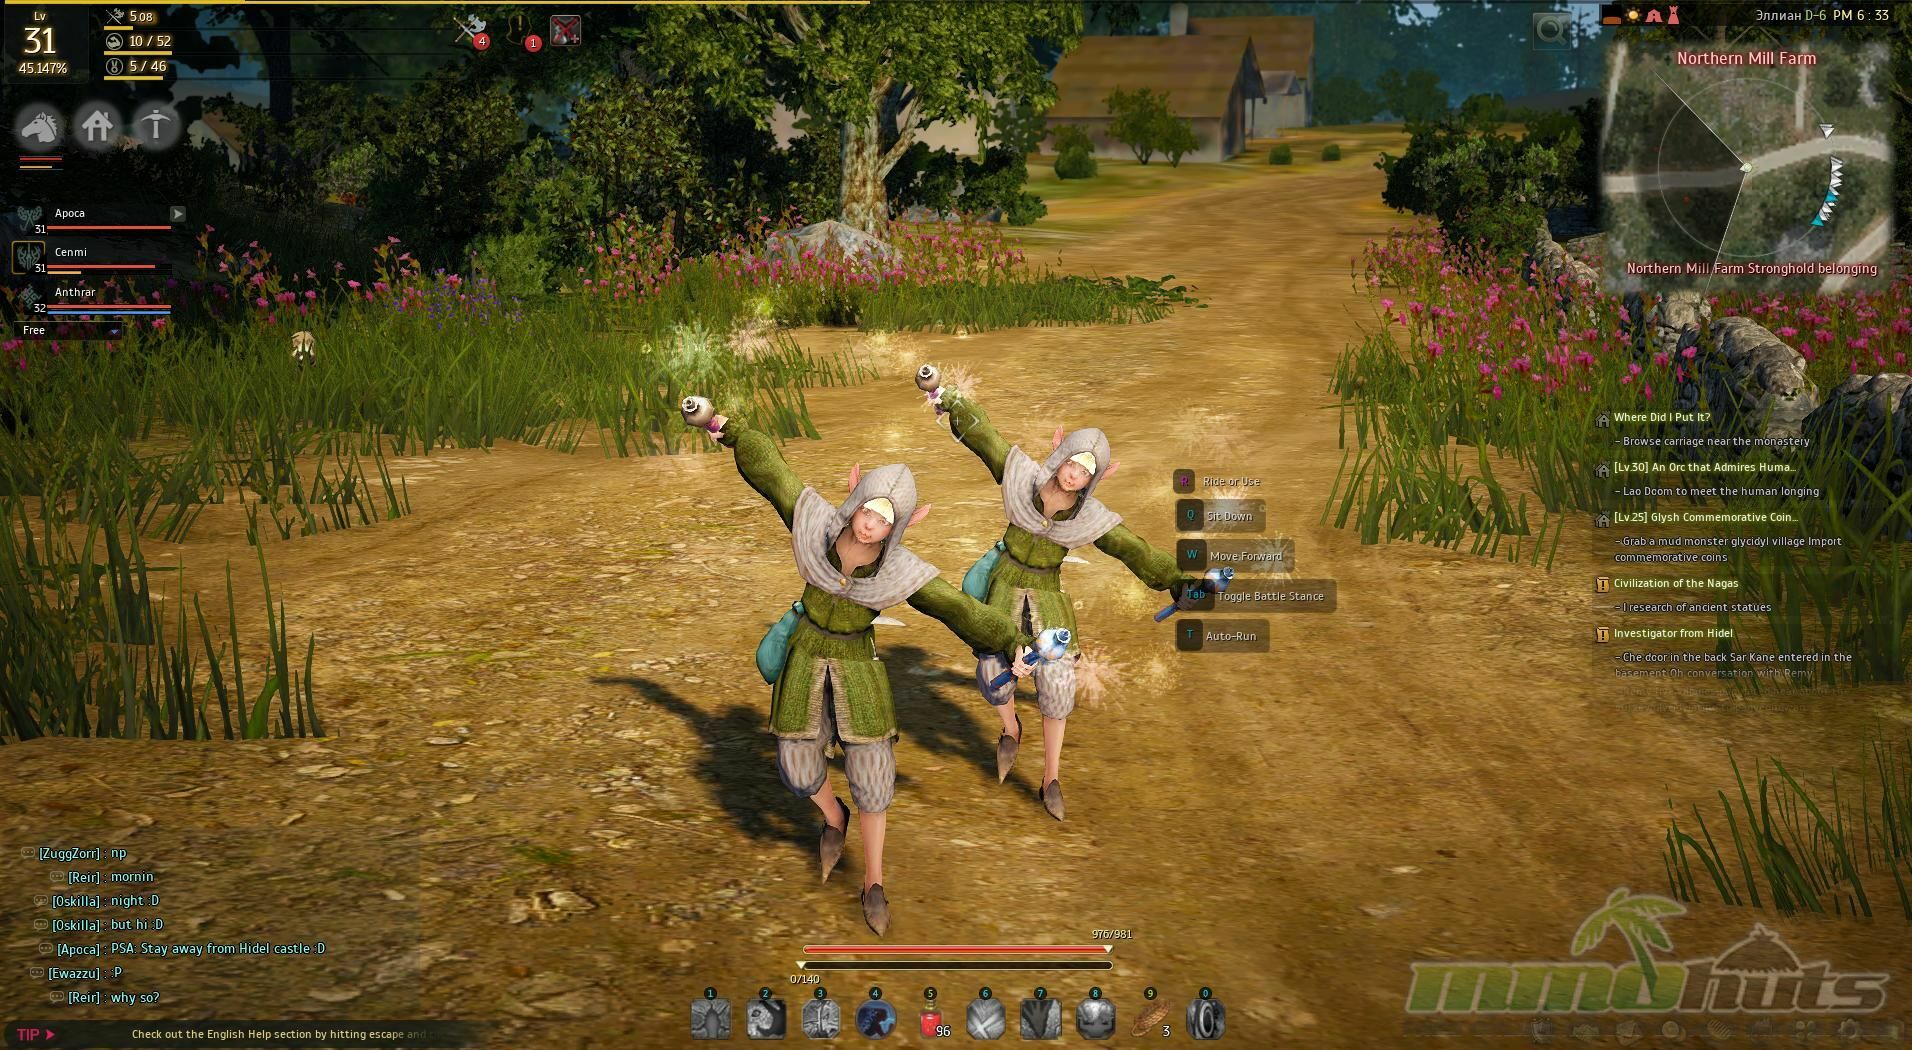 Black Desert Online Early Access Impressions